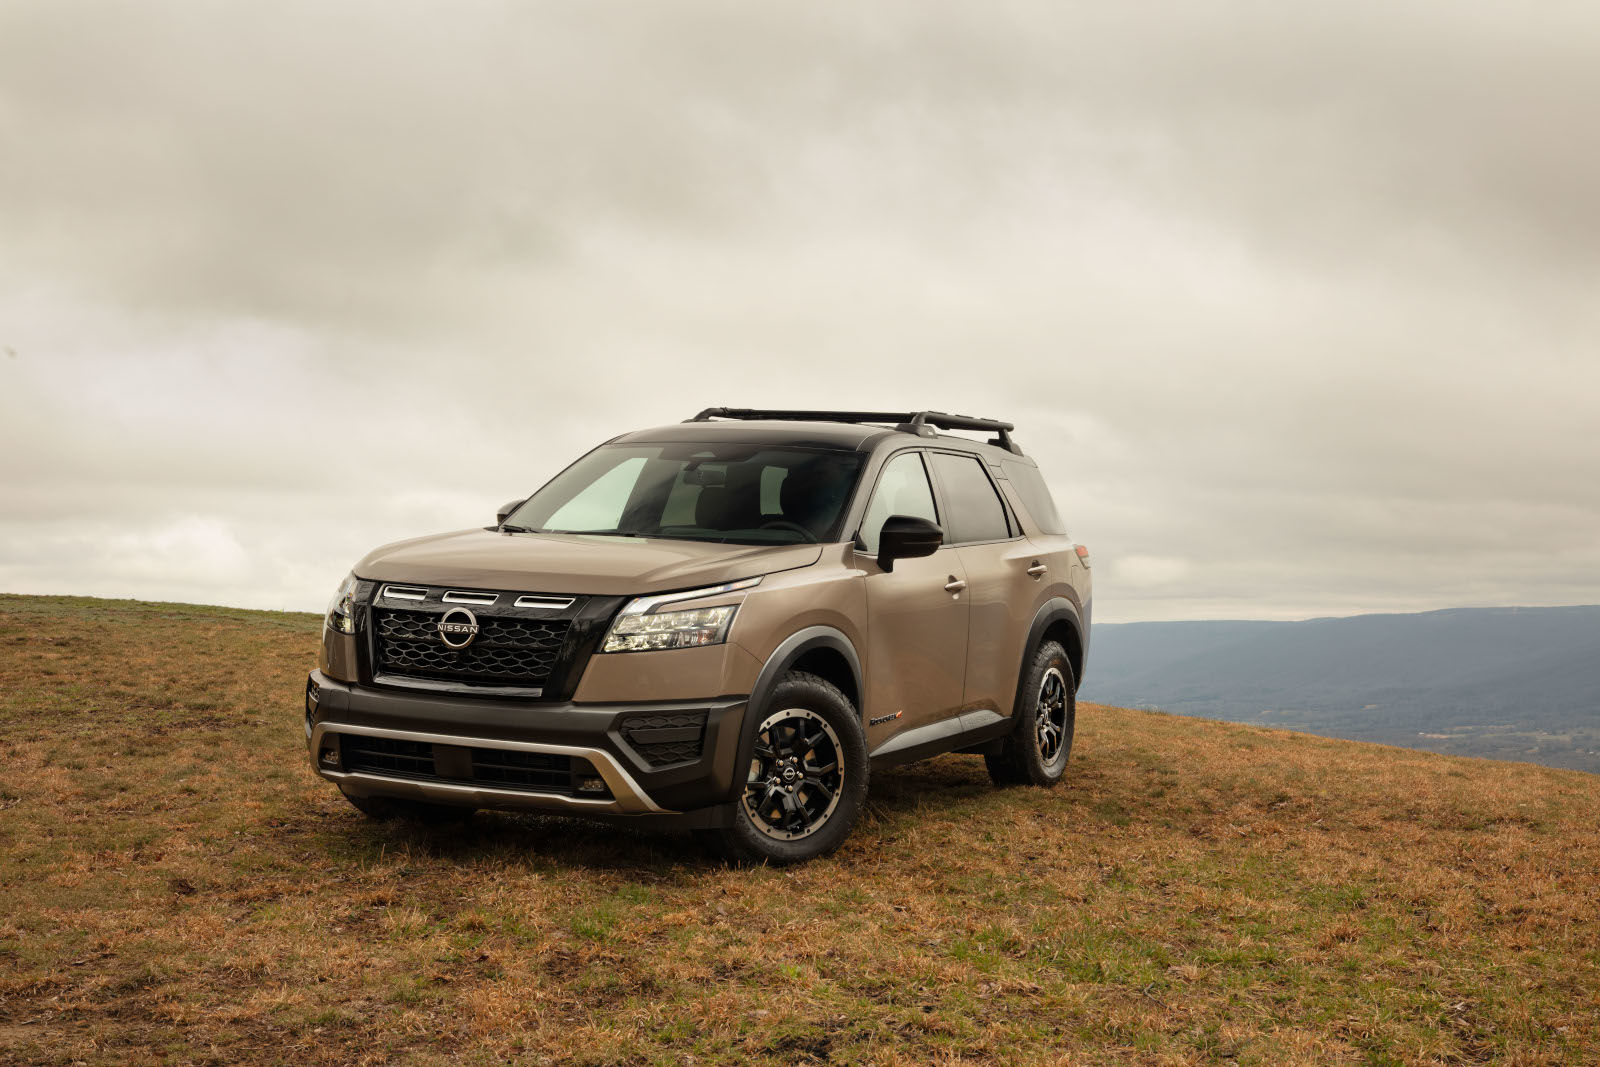 A Look at the 2023 Nissan Pathfinder